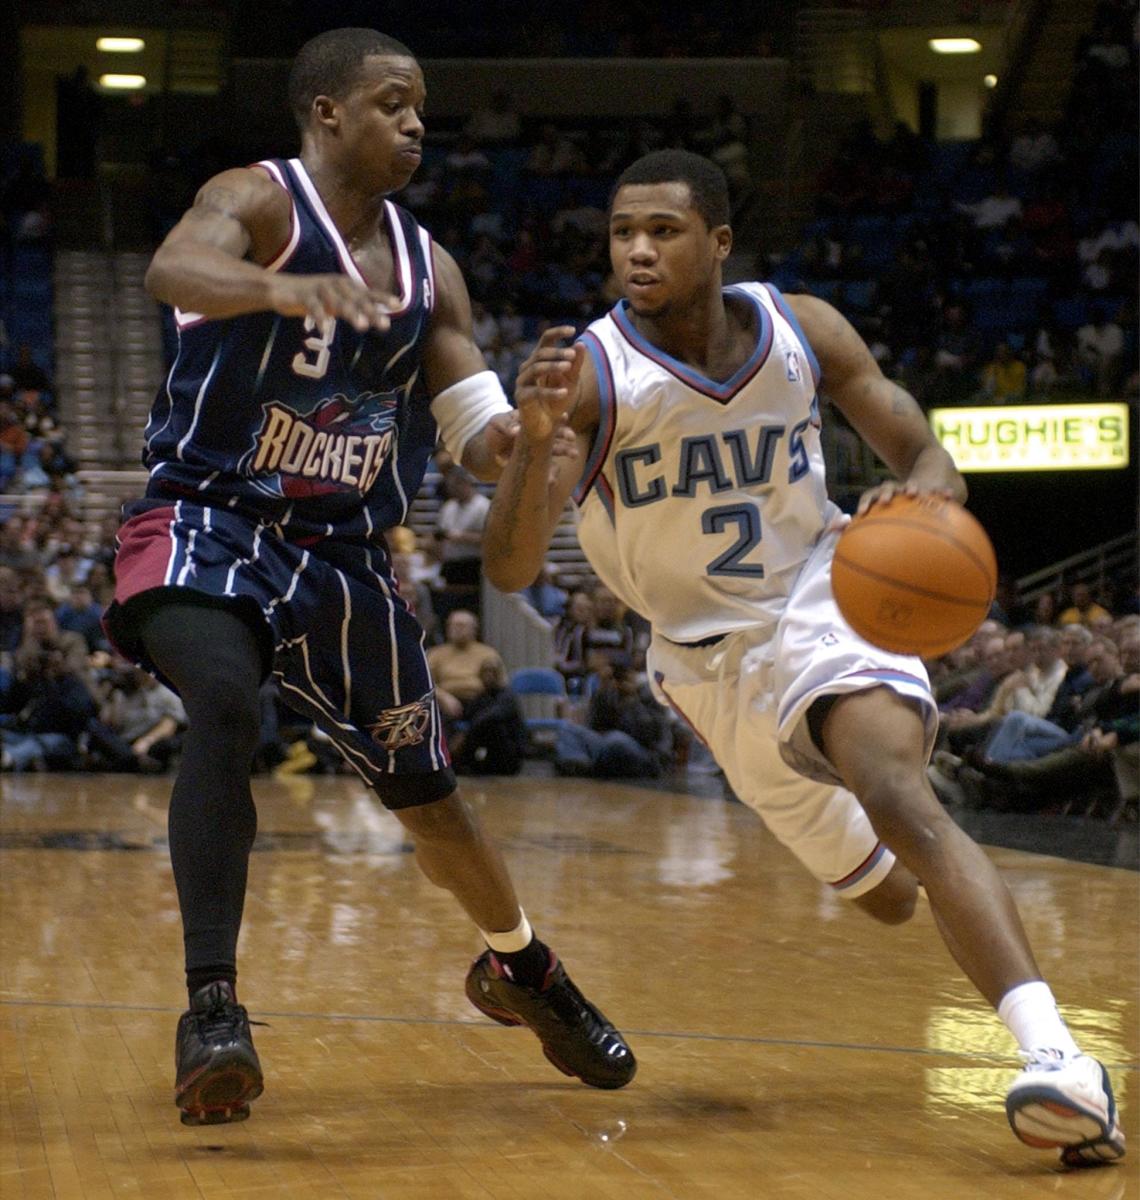 Cleveland Cavaliers' guard Dajuan Wagner (R) drives against Houston Rockets' guard Steve Francis (L) in the third quarter of ther NBA game 05 February 2003 at Gund Arena in Cleveland, OH. Cleveland defeated Houston 105-102. AFP Photo/David Maxwell (Photo by DAVID MAXWELL / AFP) (Photo credit should read DAVID MAXWELL/AFP via Getty Images)